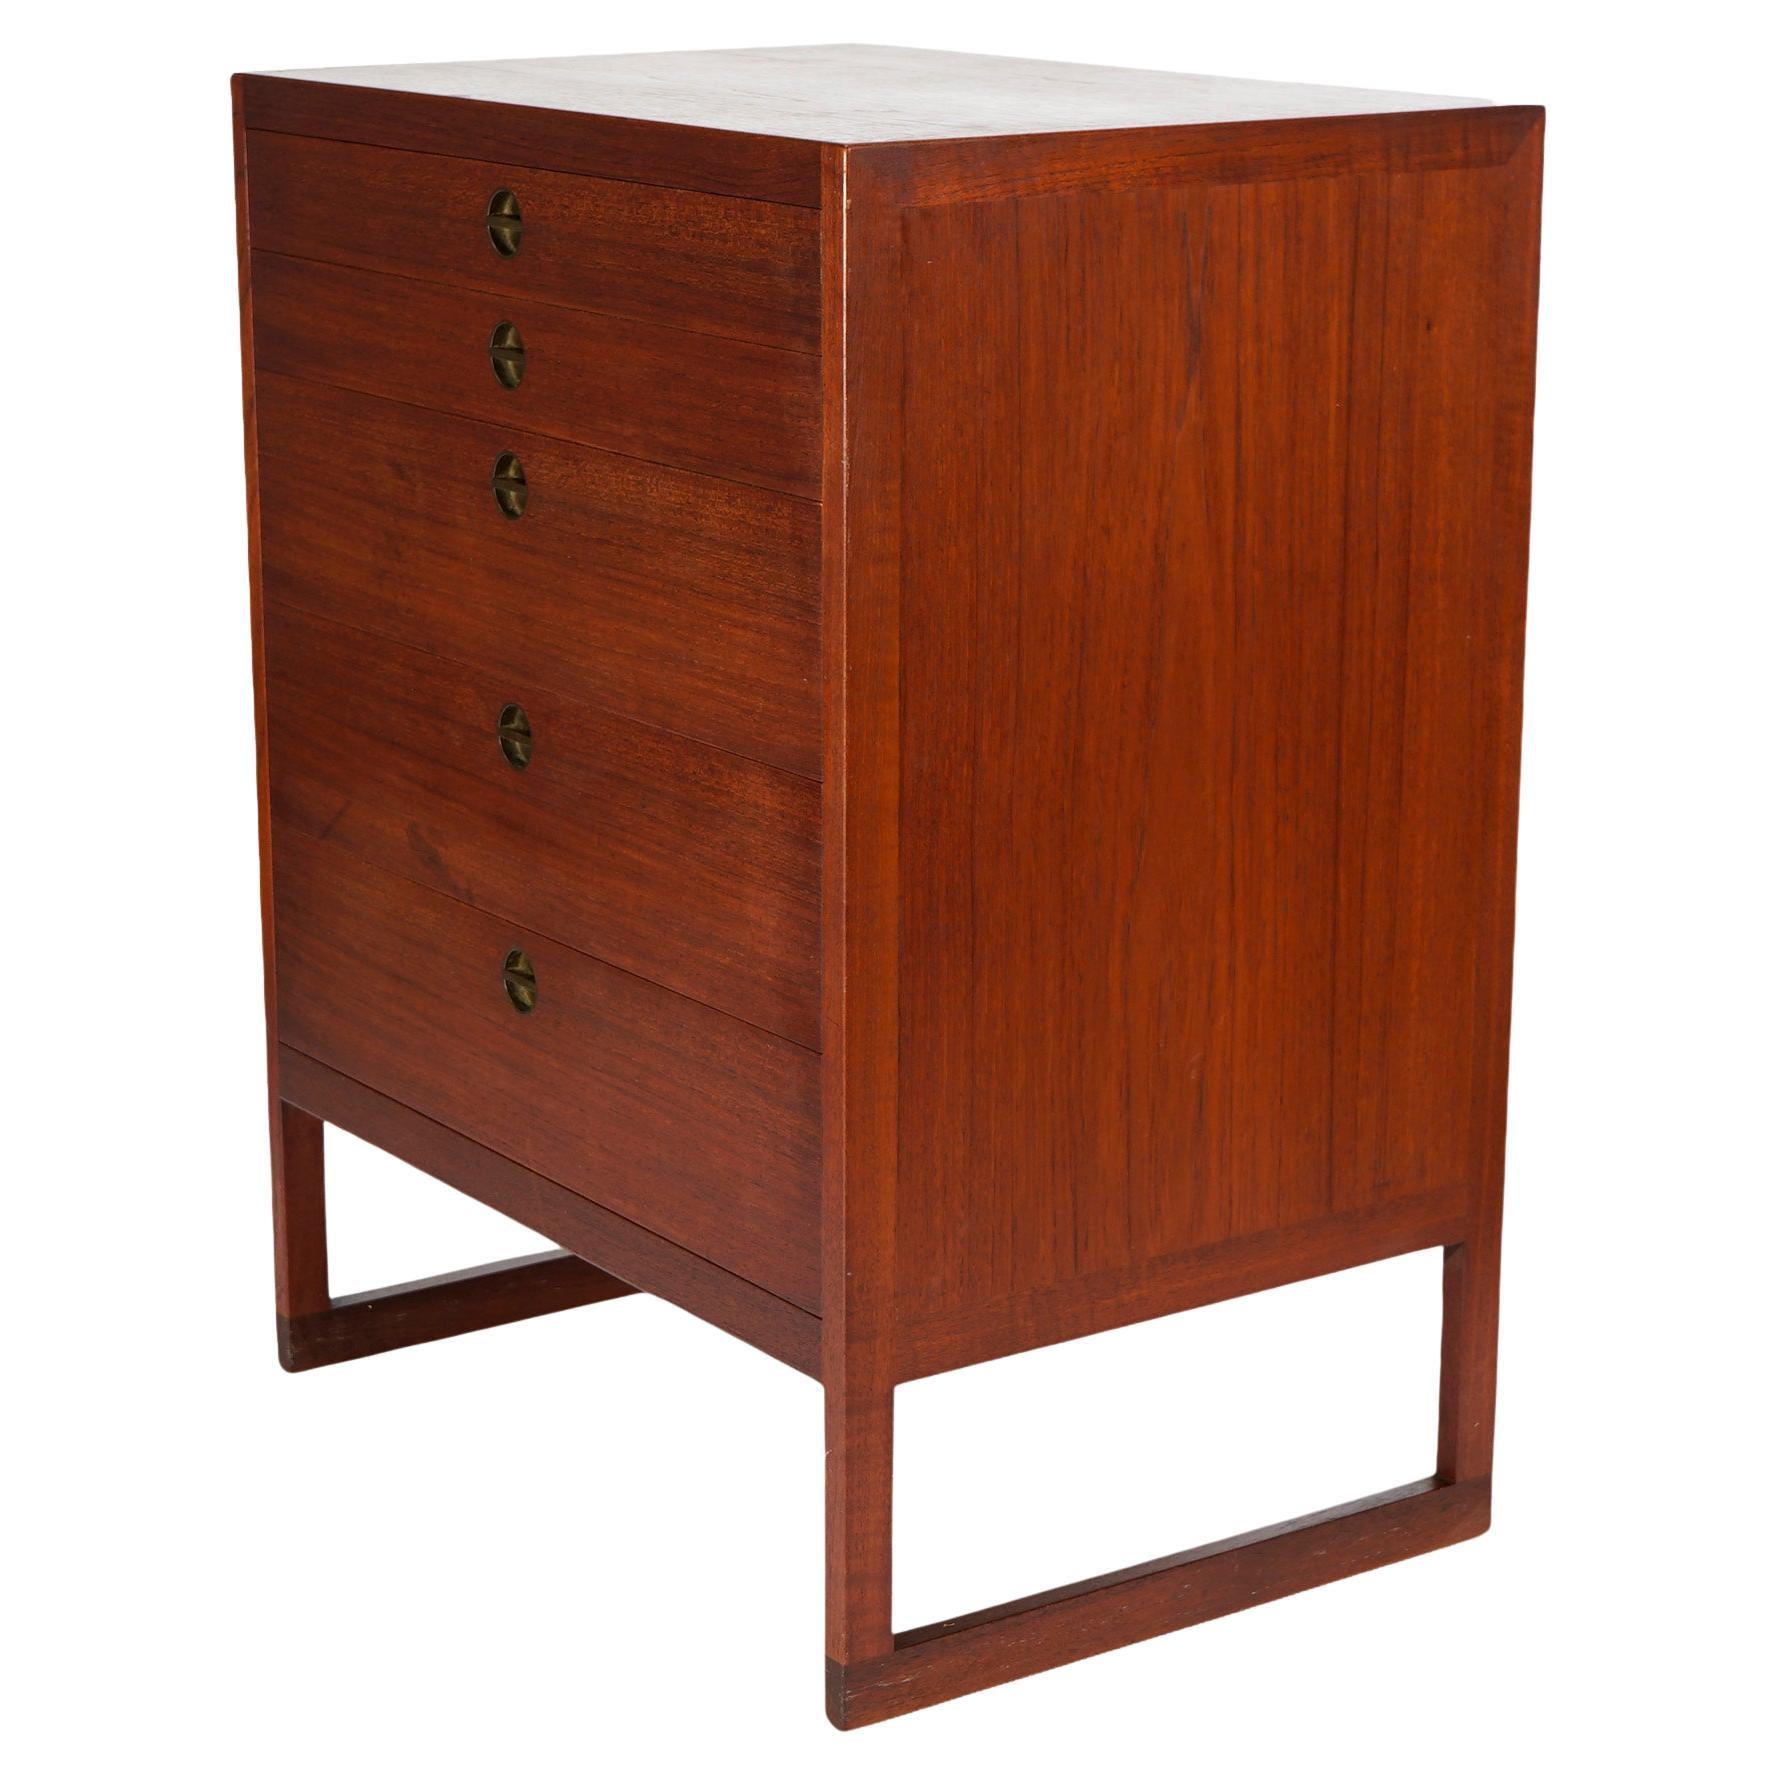 A Mid Century Danish Modern chest of drawers by cabinetmaker Povl Dinesen of Copenhagen, Denmark offers teak wood construction with two shallow drawers over three deeper drawers, all with brass pulls, maker label as photographed, c1960

Measures -